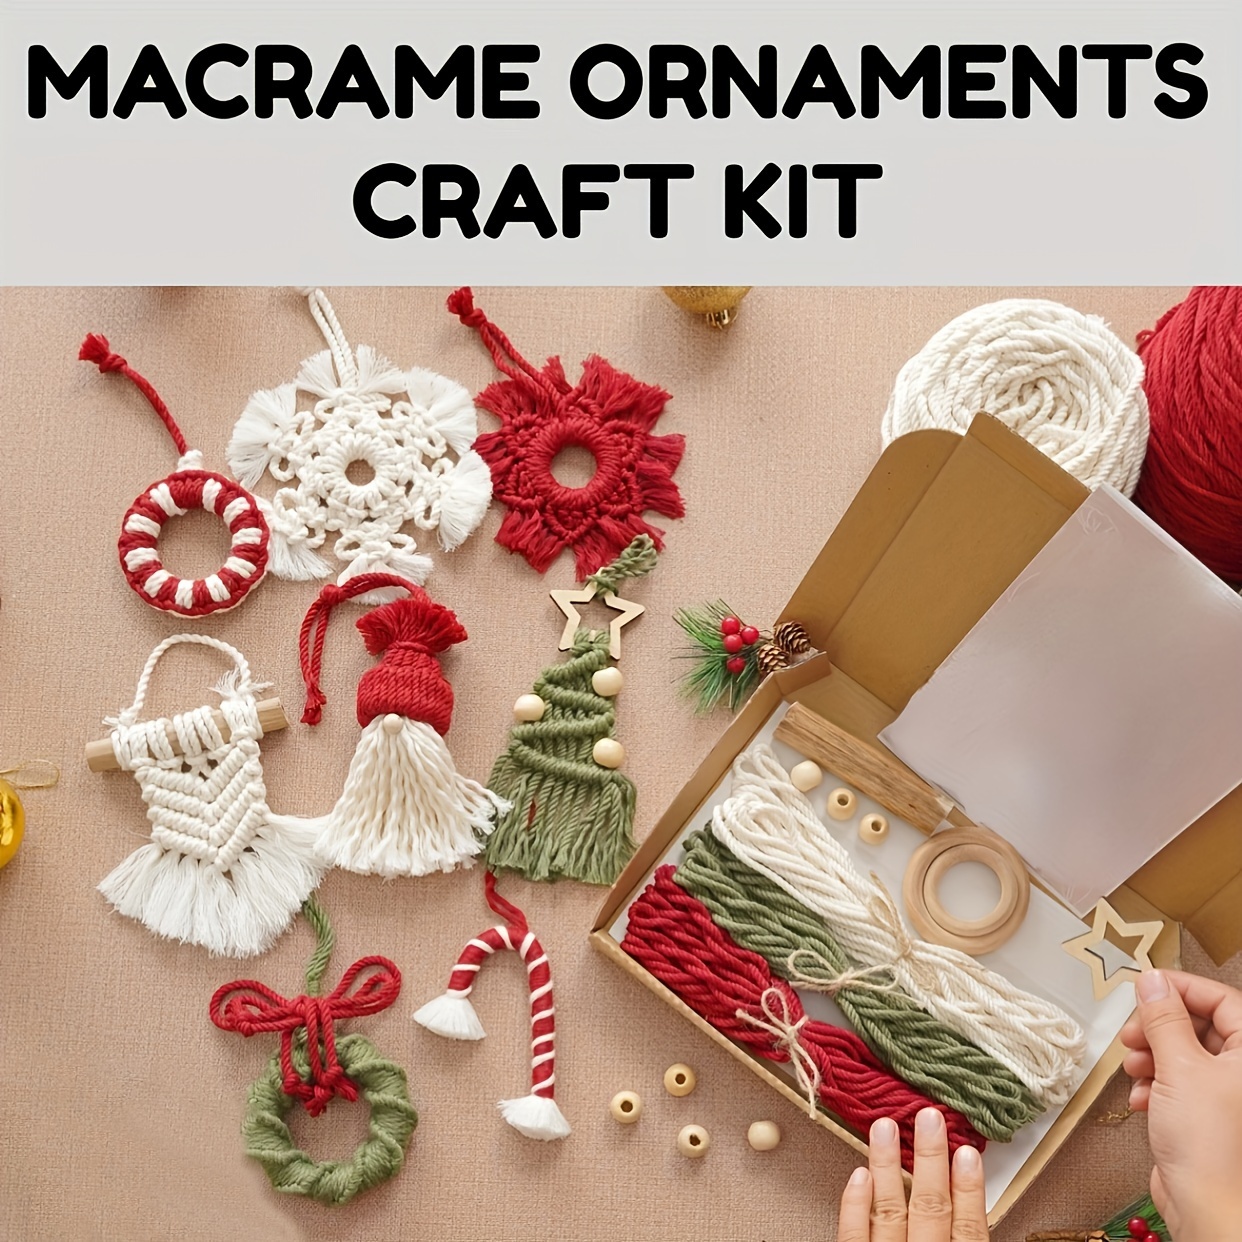 

8pcs/set, Ornament Craft Kit, Macrame Diy Kit, Art Kits For Adults, Home Decor Craft, Macrame Ornaments, Modern Christmas, Rustic Farmhouse, For Family Friends Perfect Holiday Gift